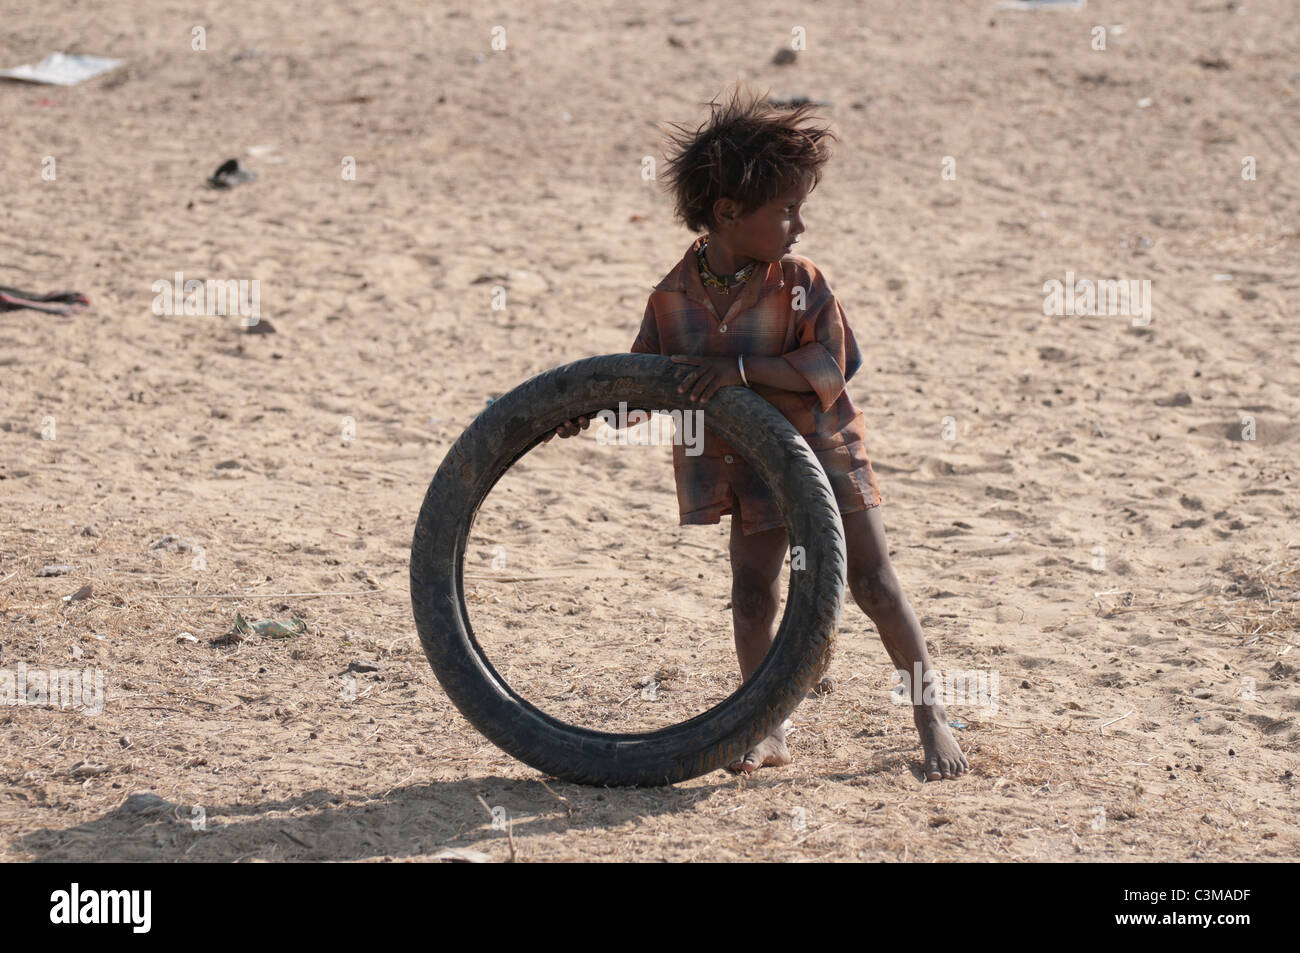 Poor child playing with a tyre in the Thar desert of Rajasthan. Stock Photo